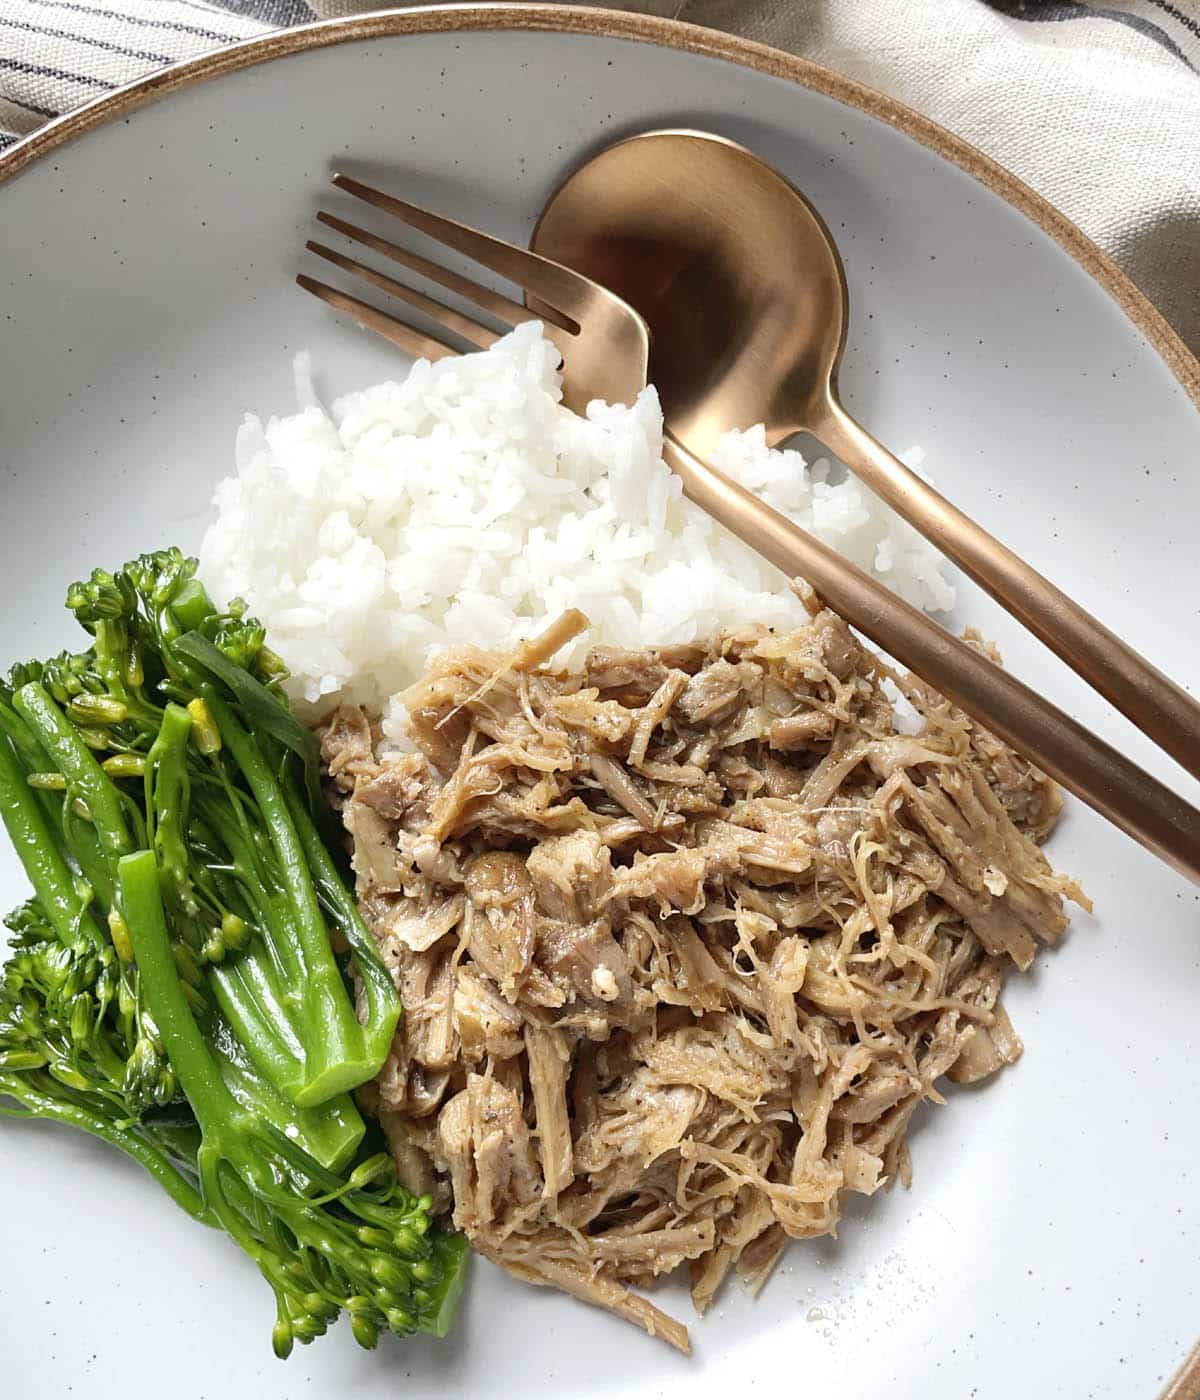 A round dish containing a fork and spoon, cooked white rice, green vegetables, and pulled pork.